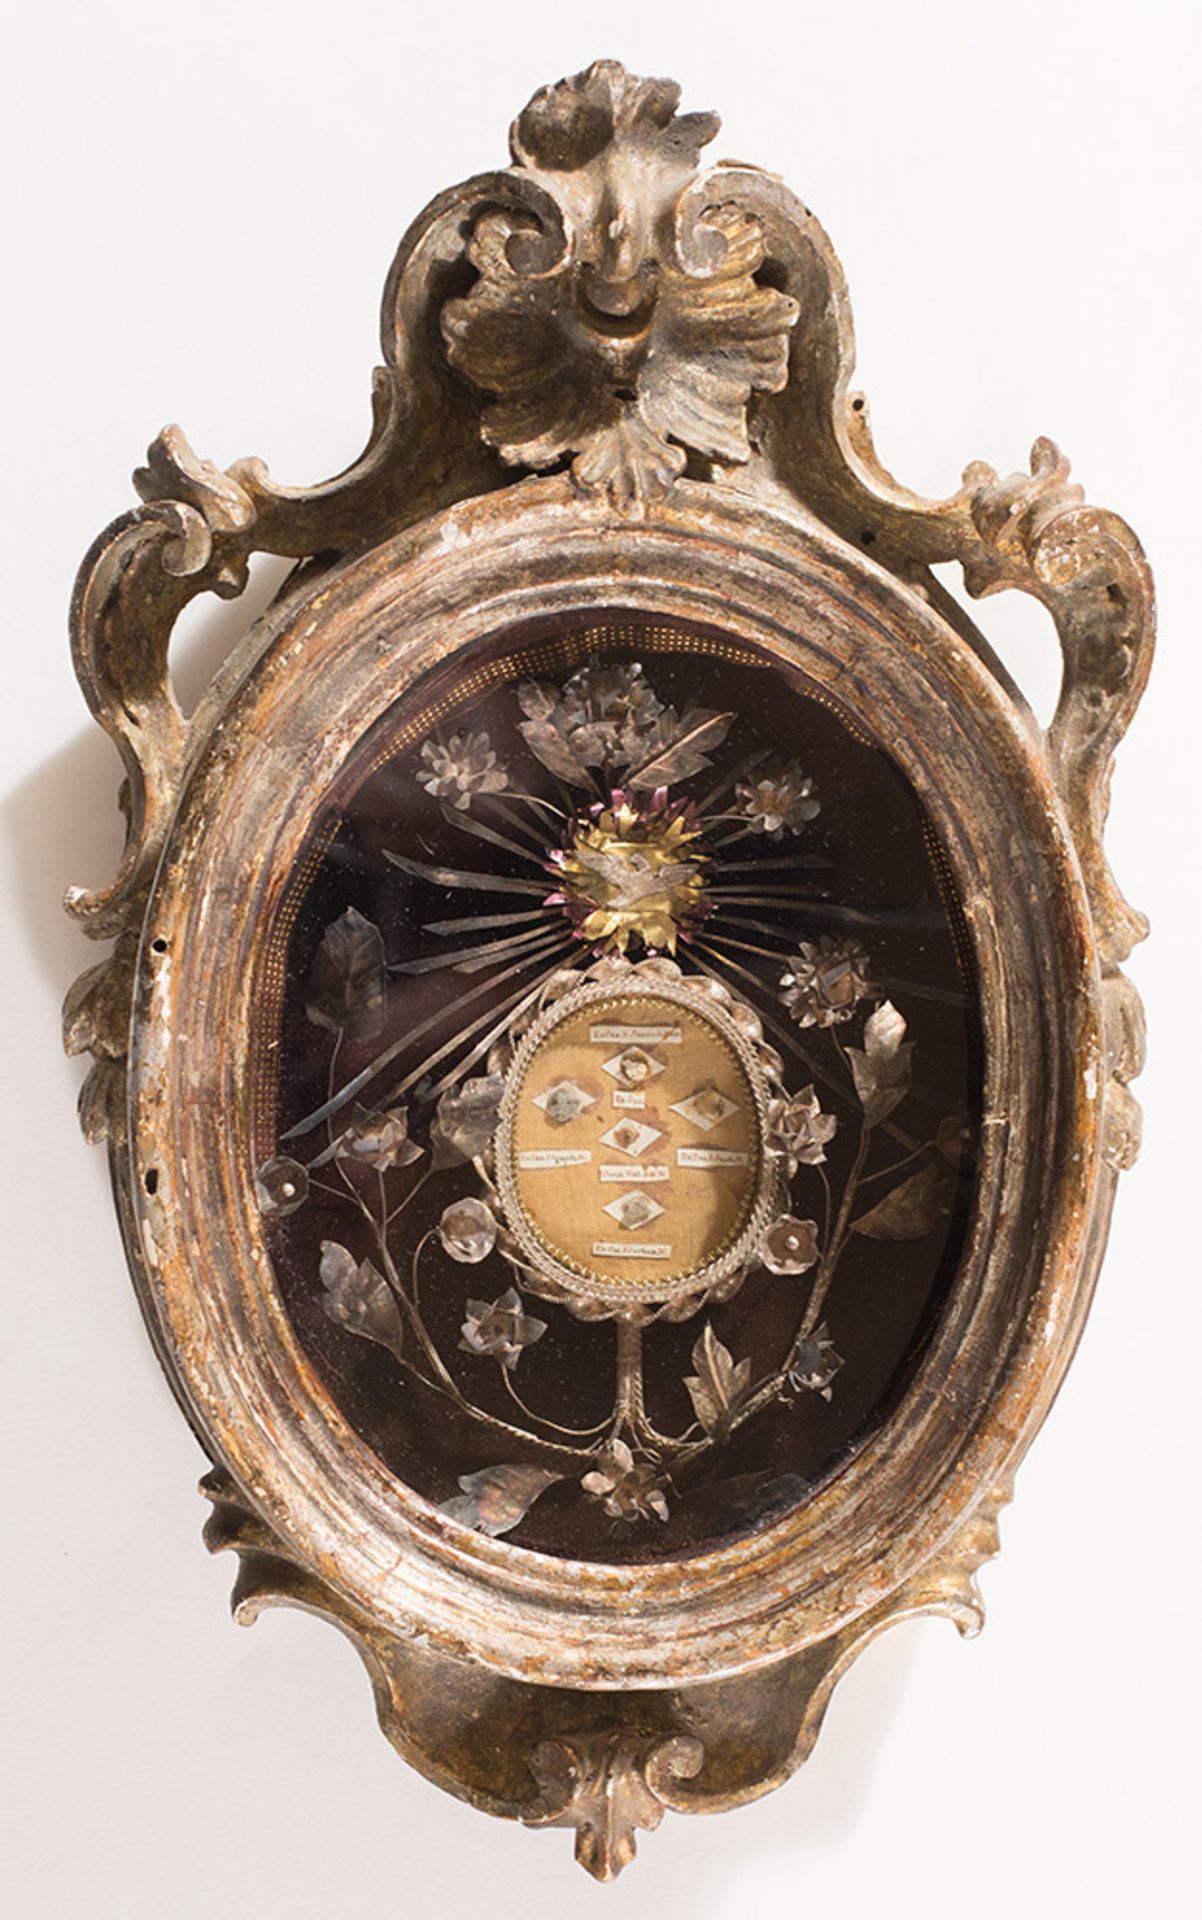 Silver filigree Relic, silvered frame, 18th Century